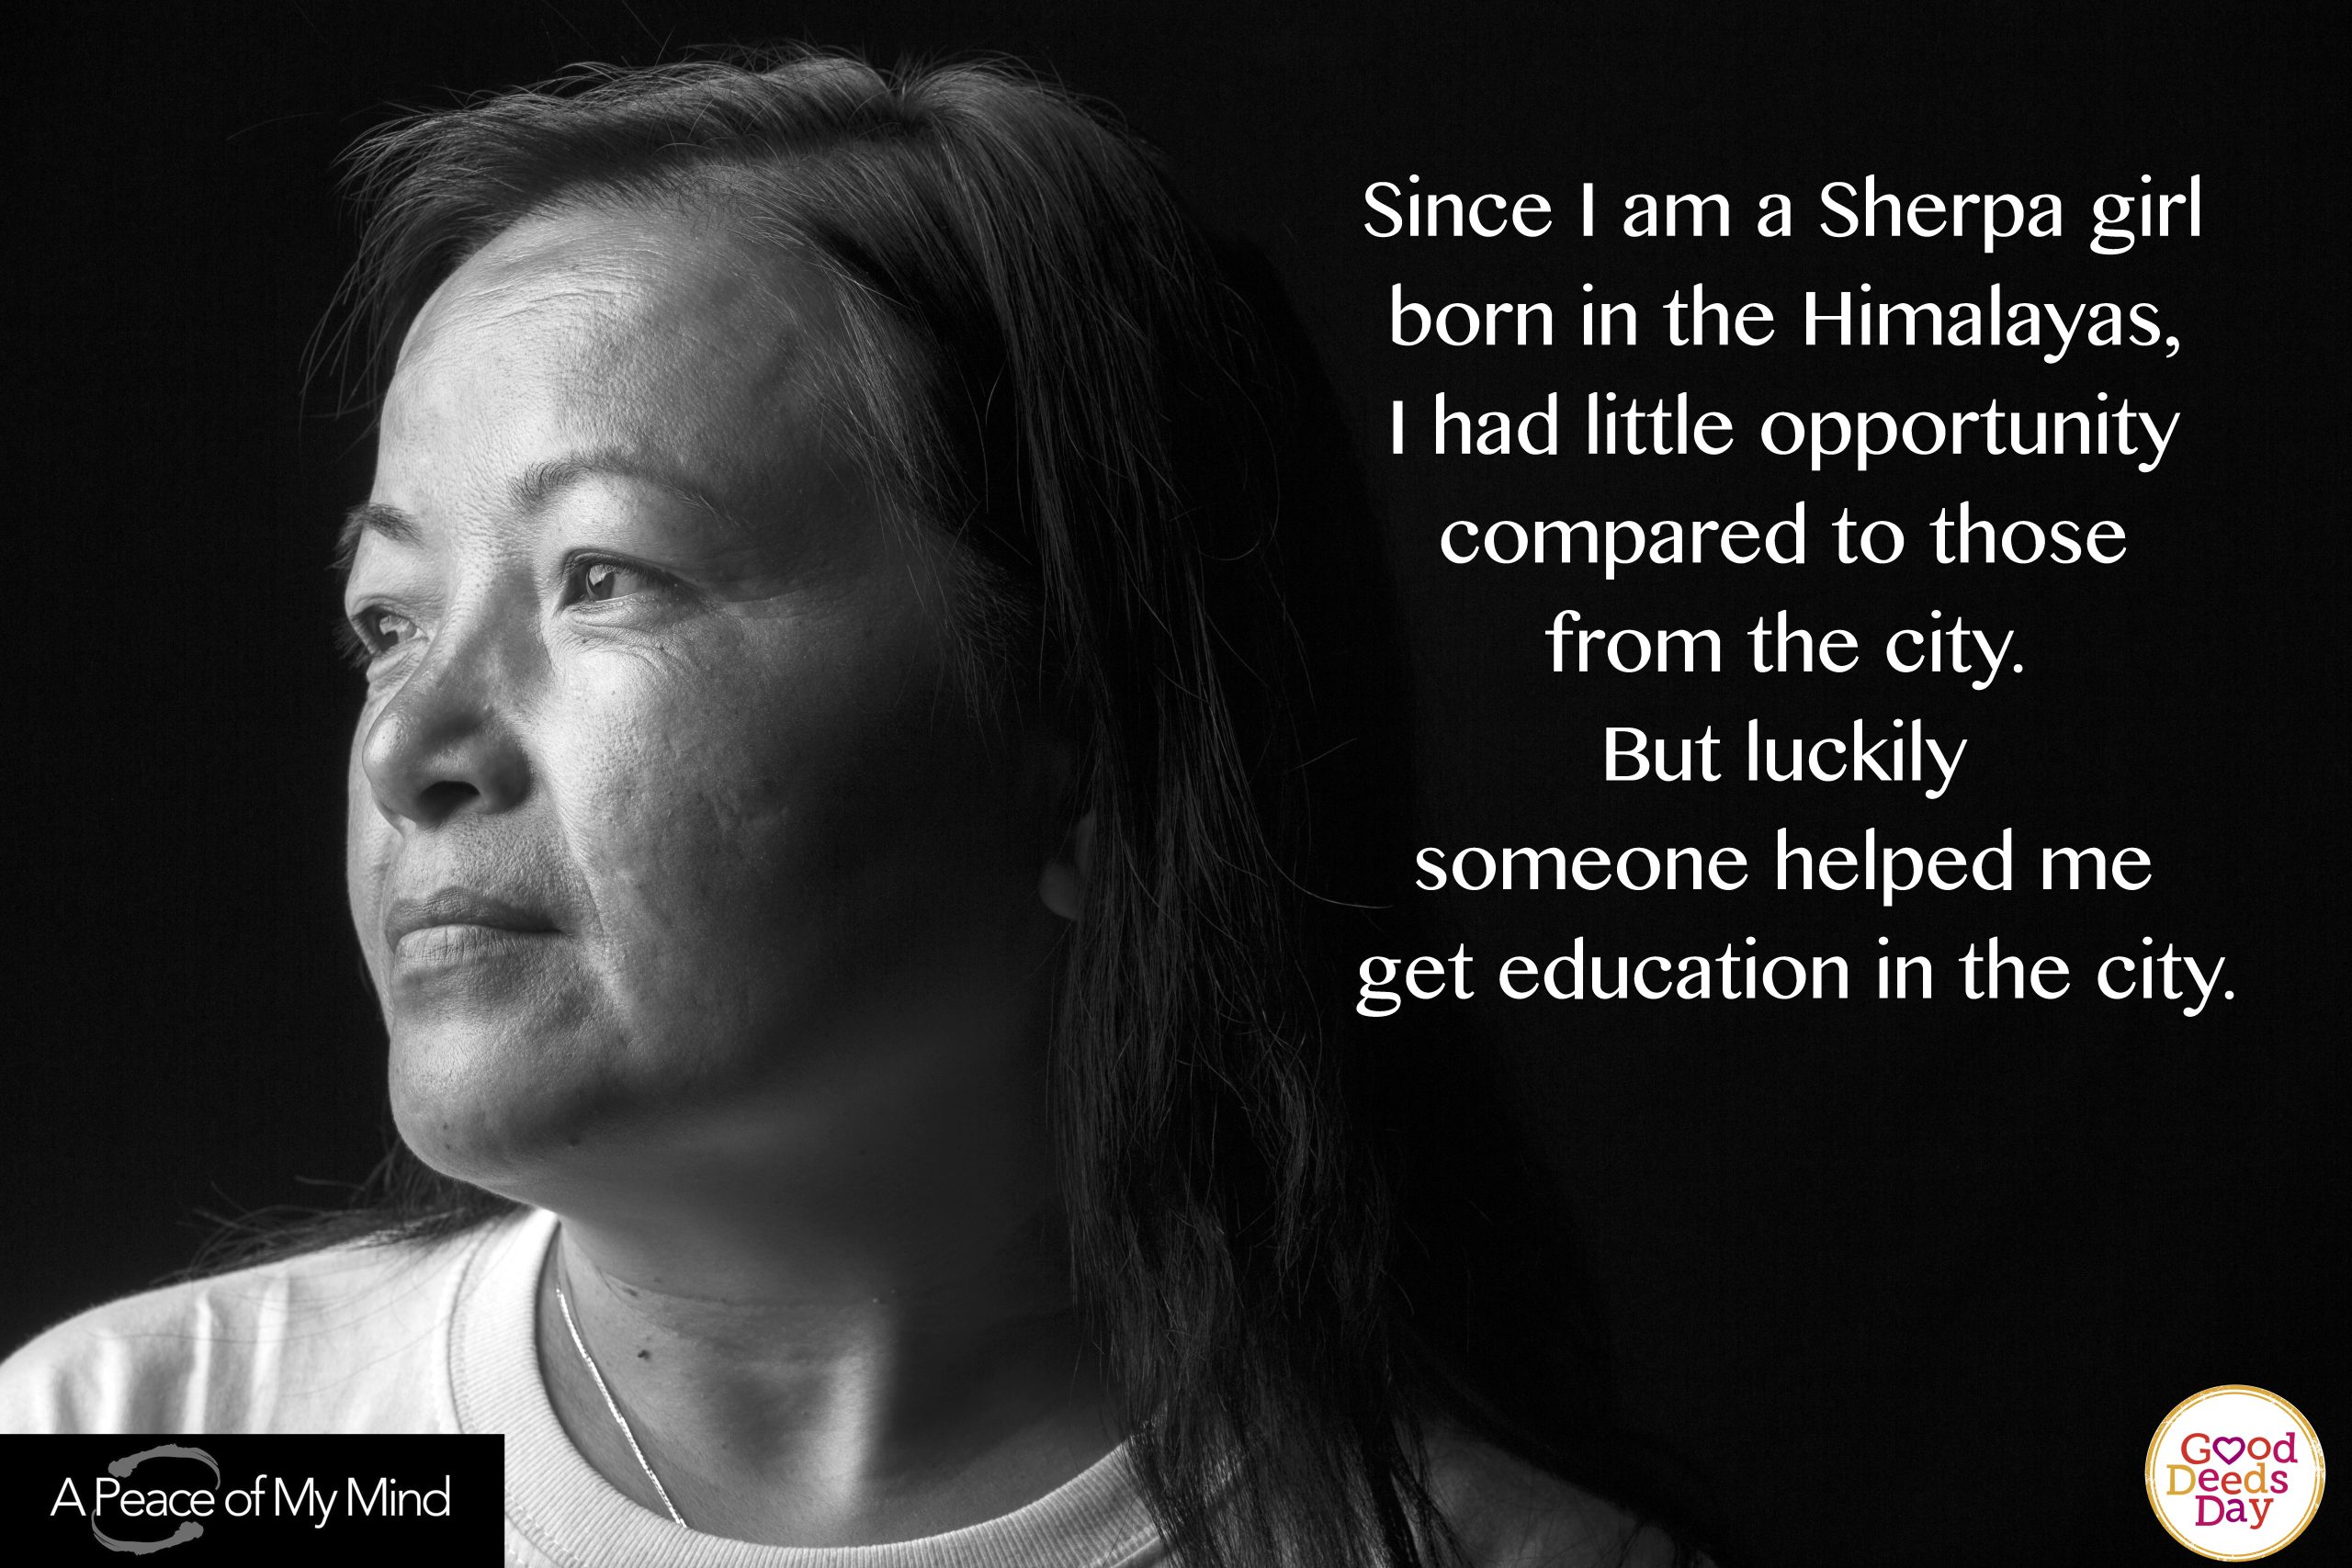 Since I am Sherpa girl born in the Himalayas. I had little opportunity compared to those from the city. But luckily someone helped me get education in the city.